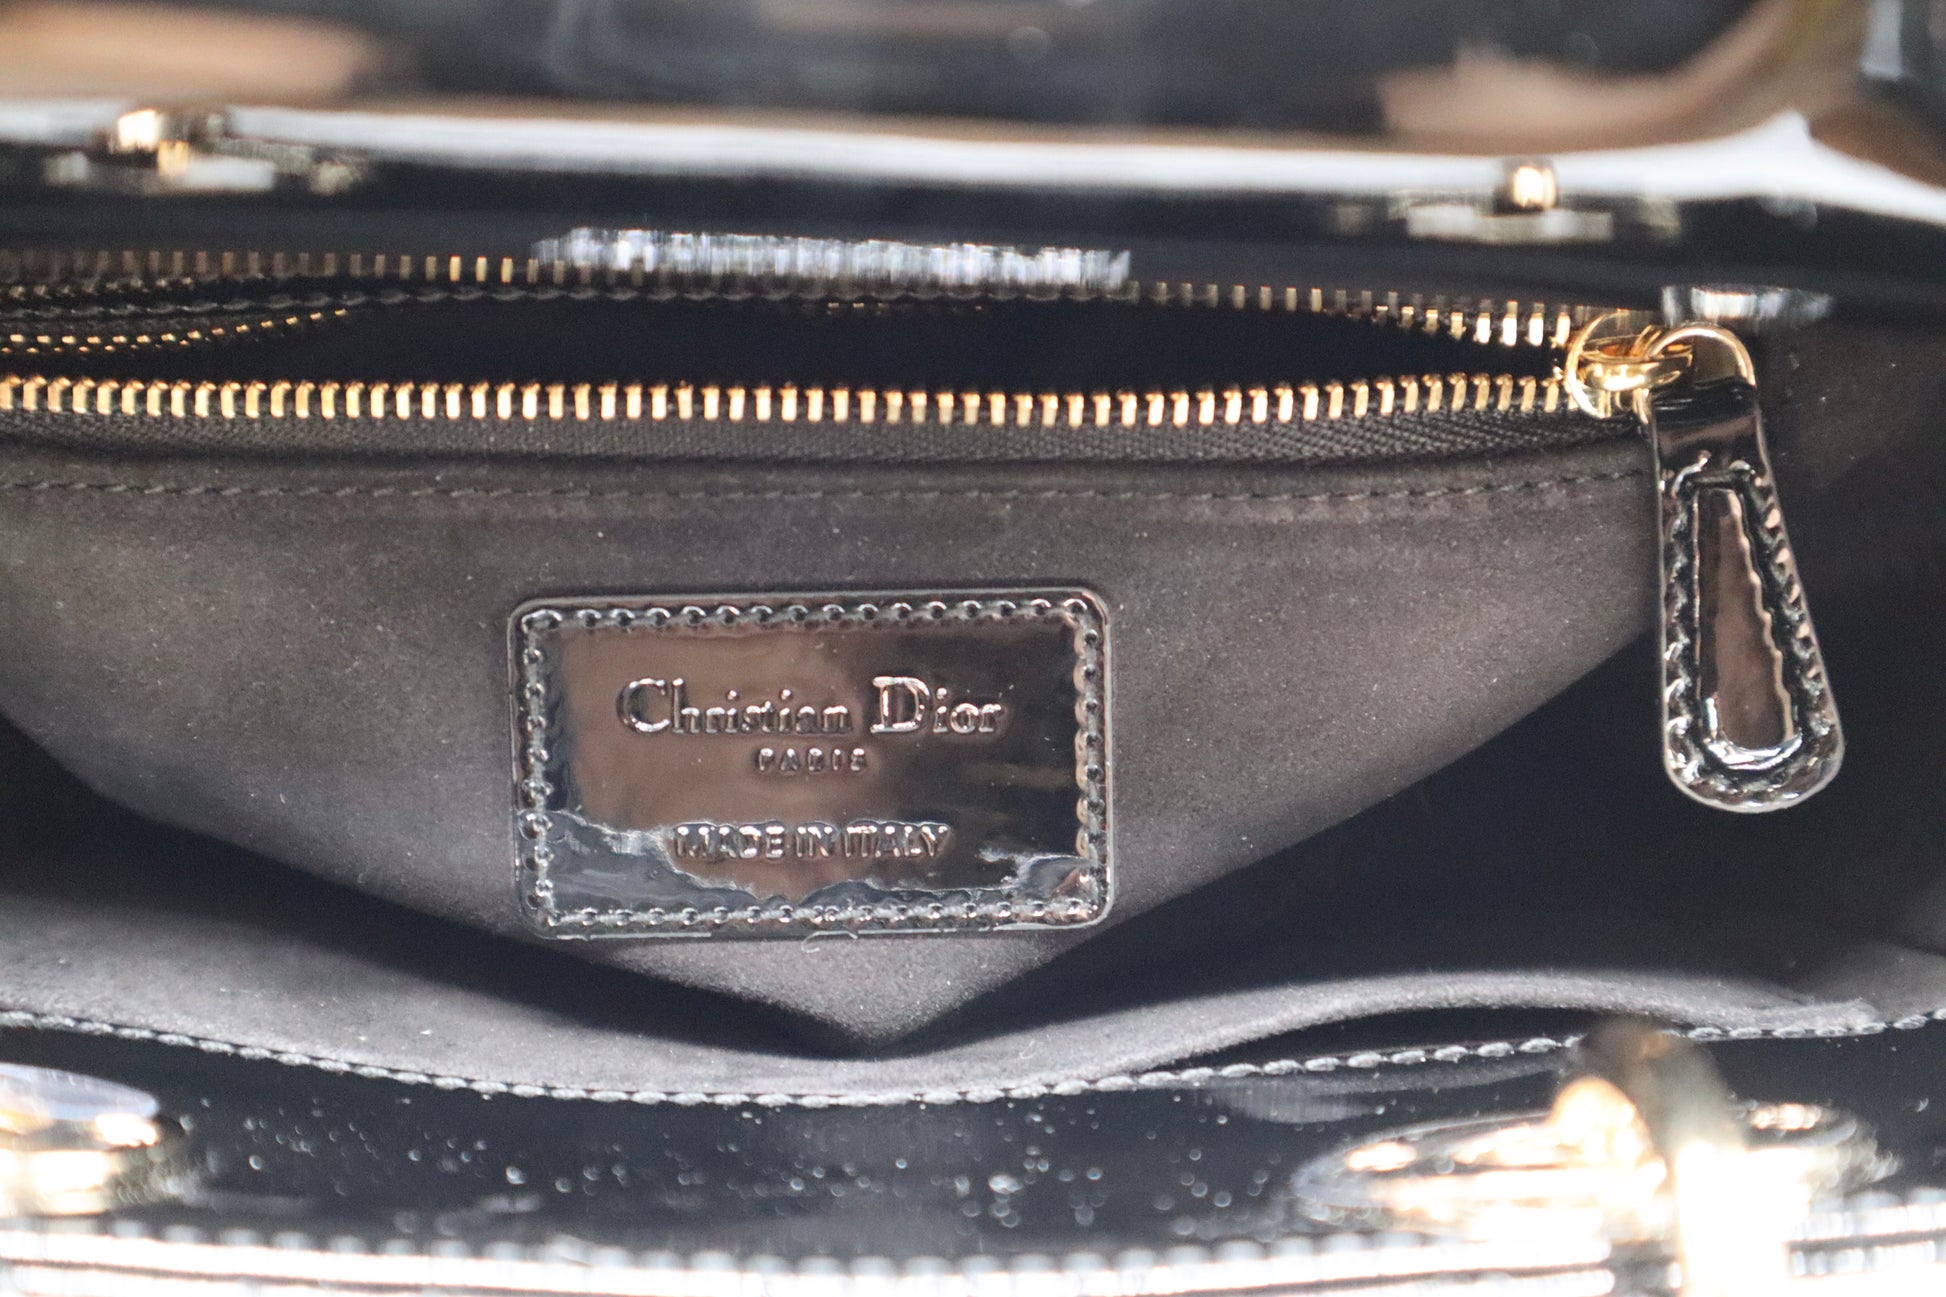 Christian Dior label inside of the small Lady Dior bag.